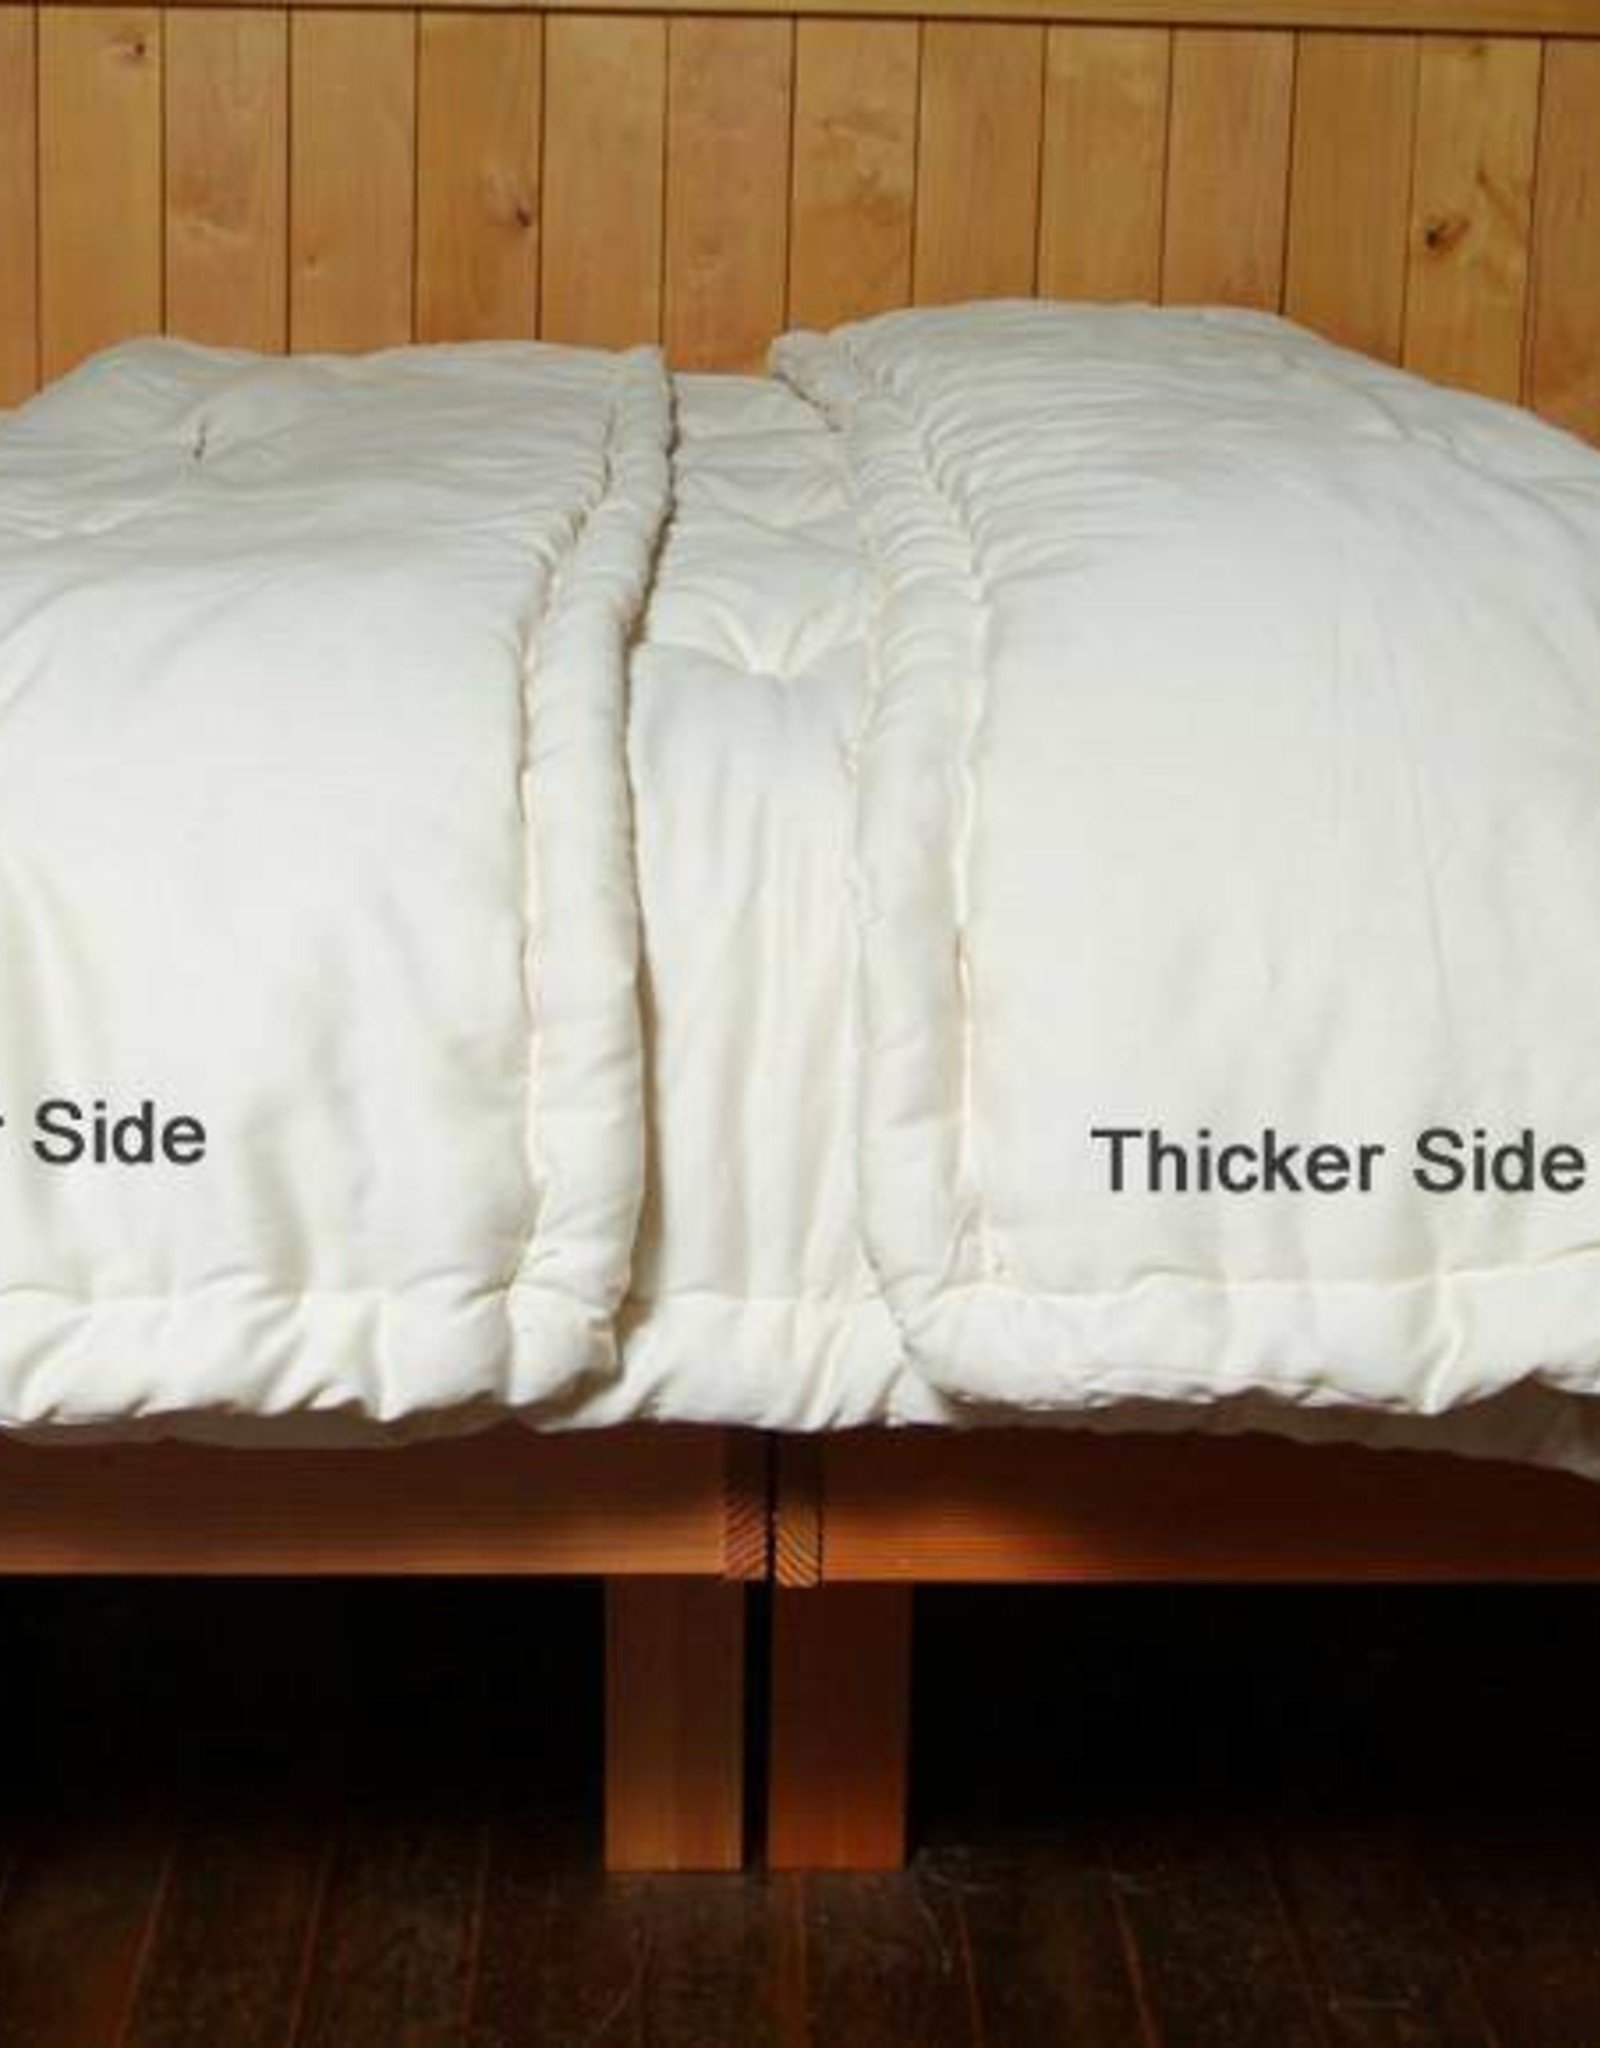 Dual Weight Comforter (Combo #3 - Perfect Comfort & Extra Warmth)